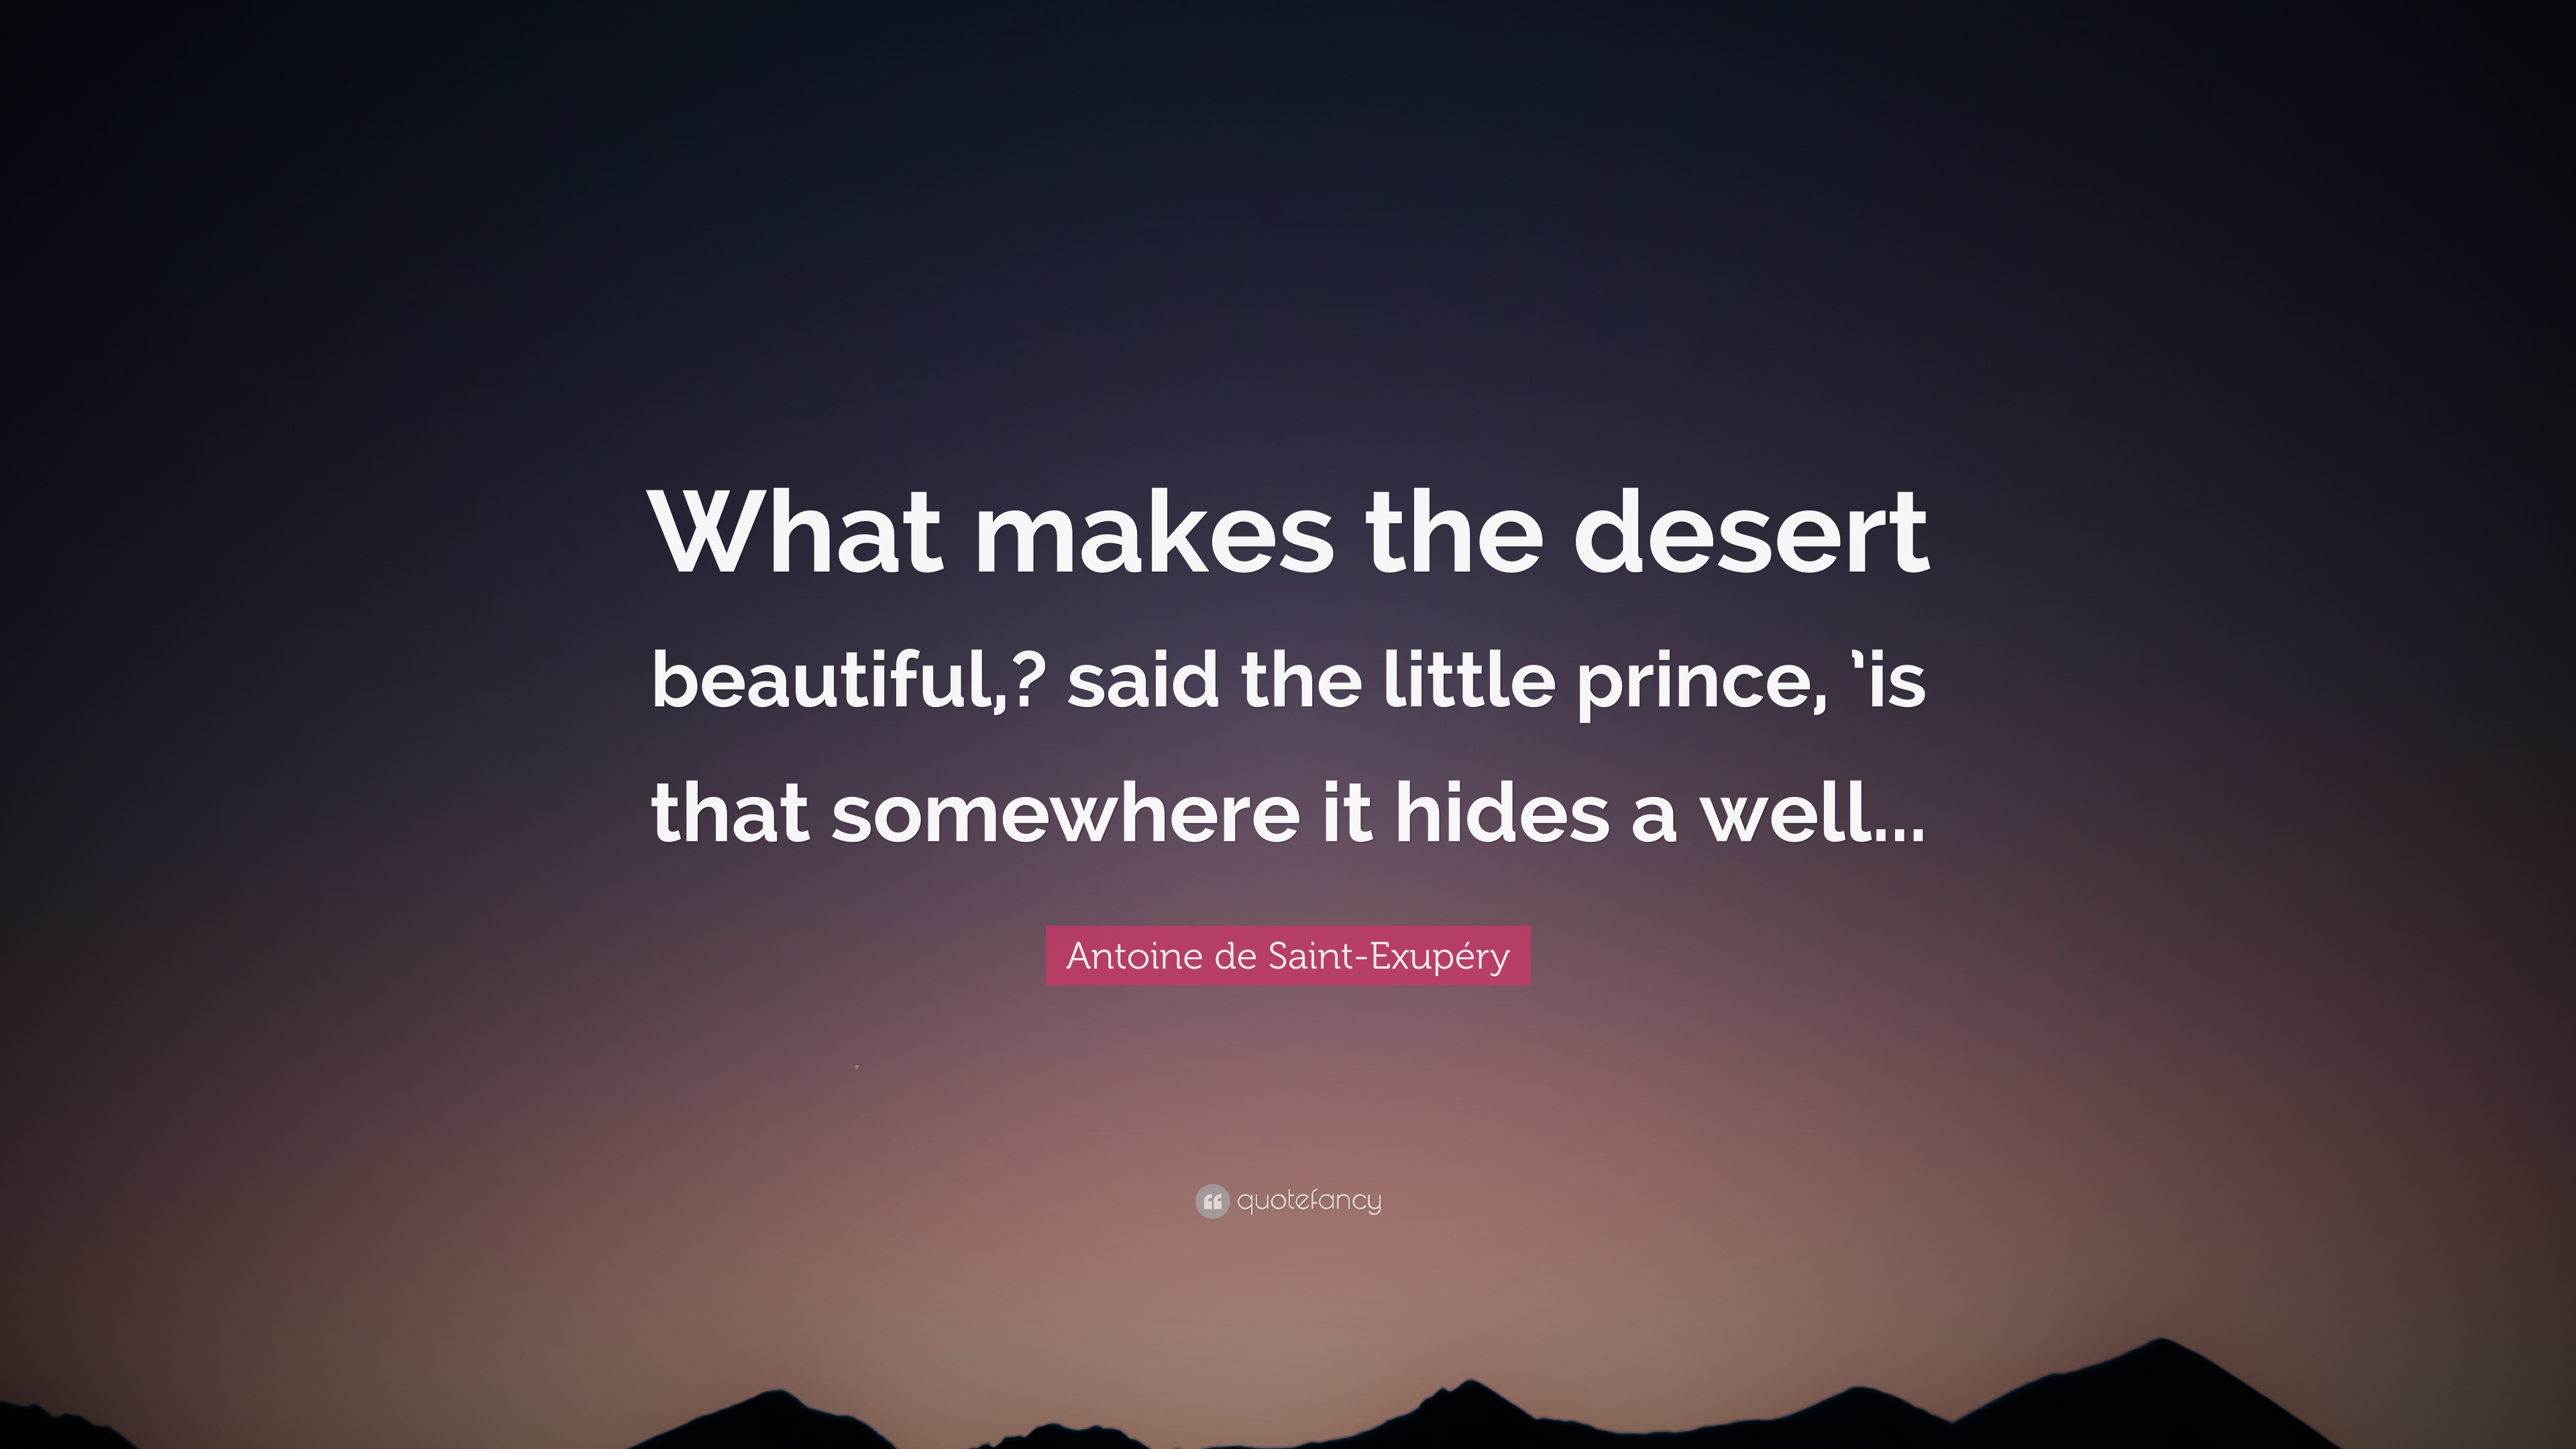 Little Prince Quotes Wallpapers